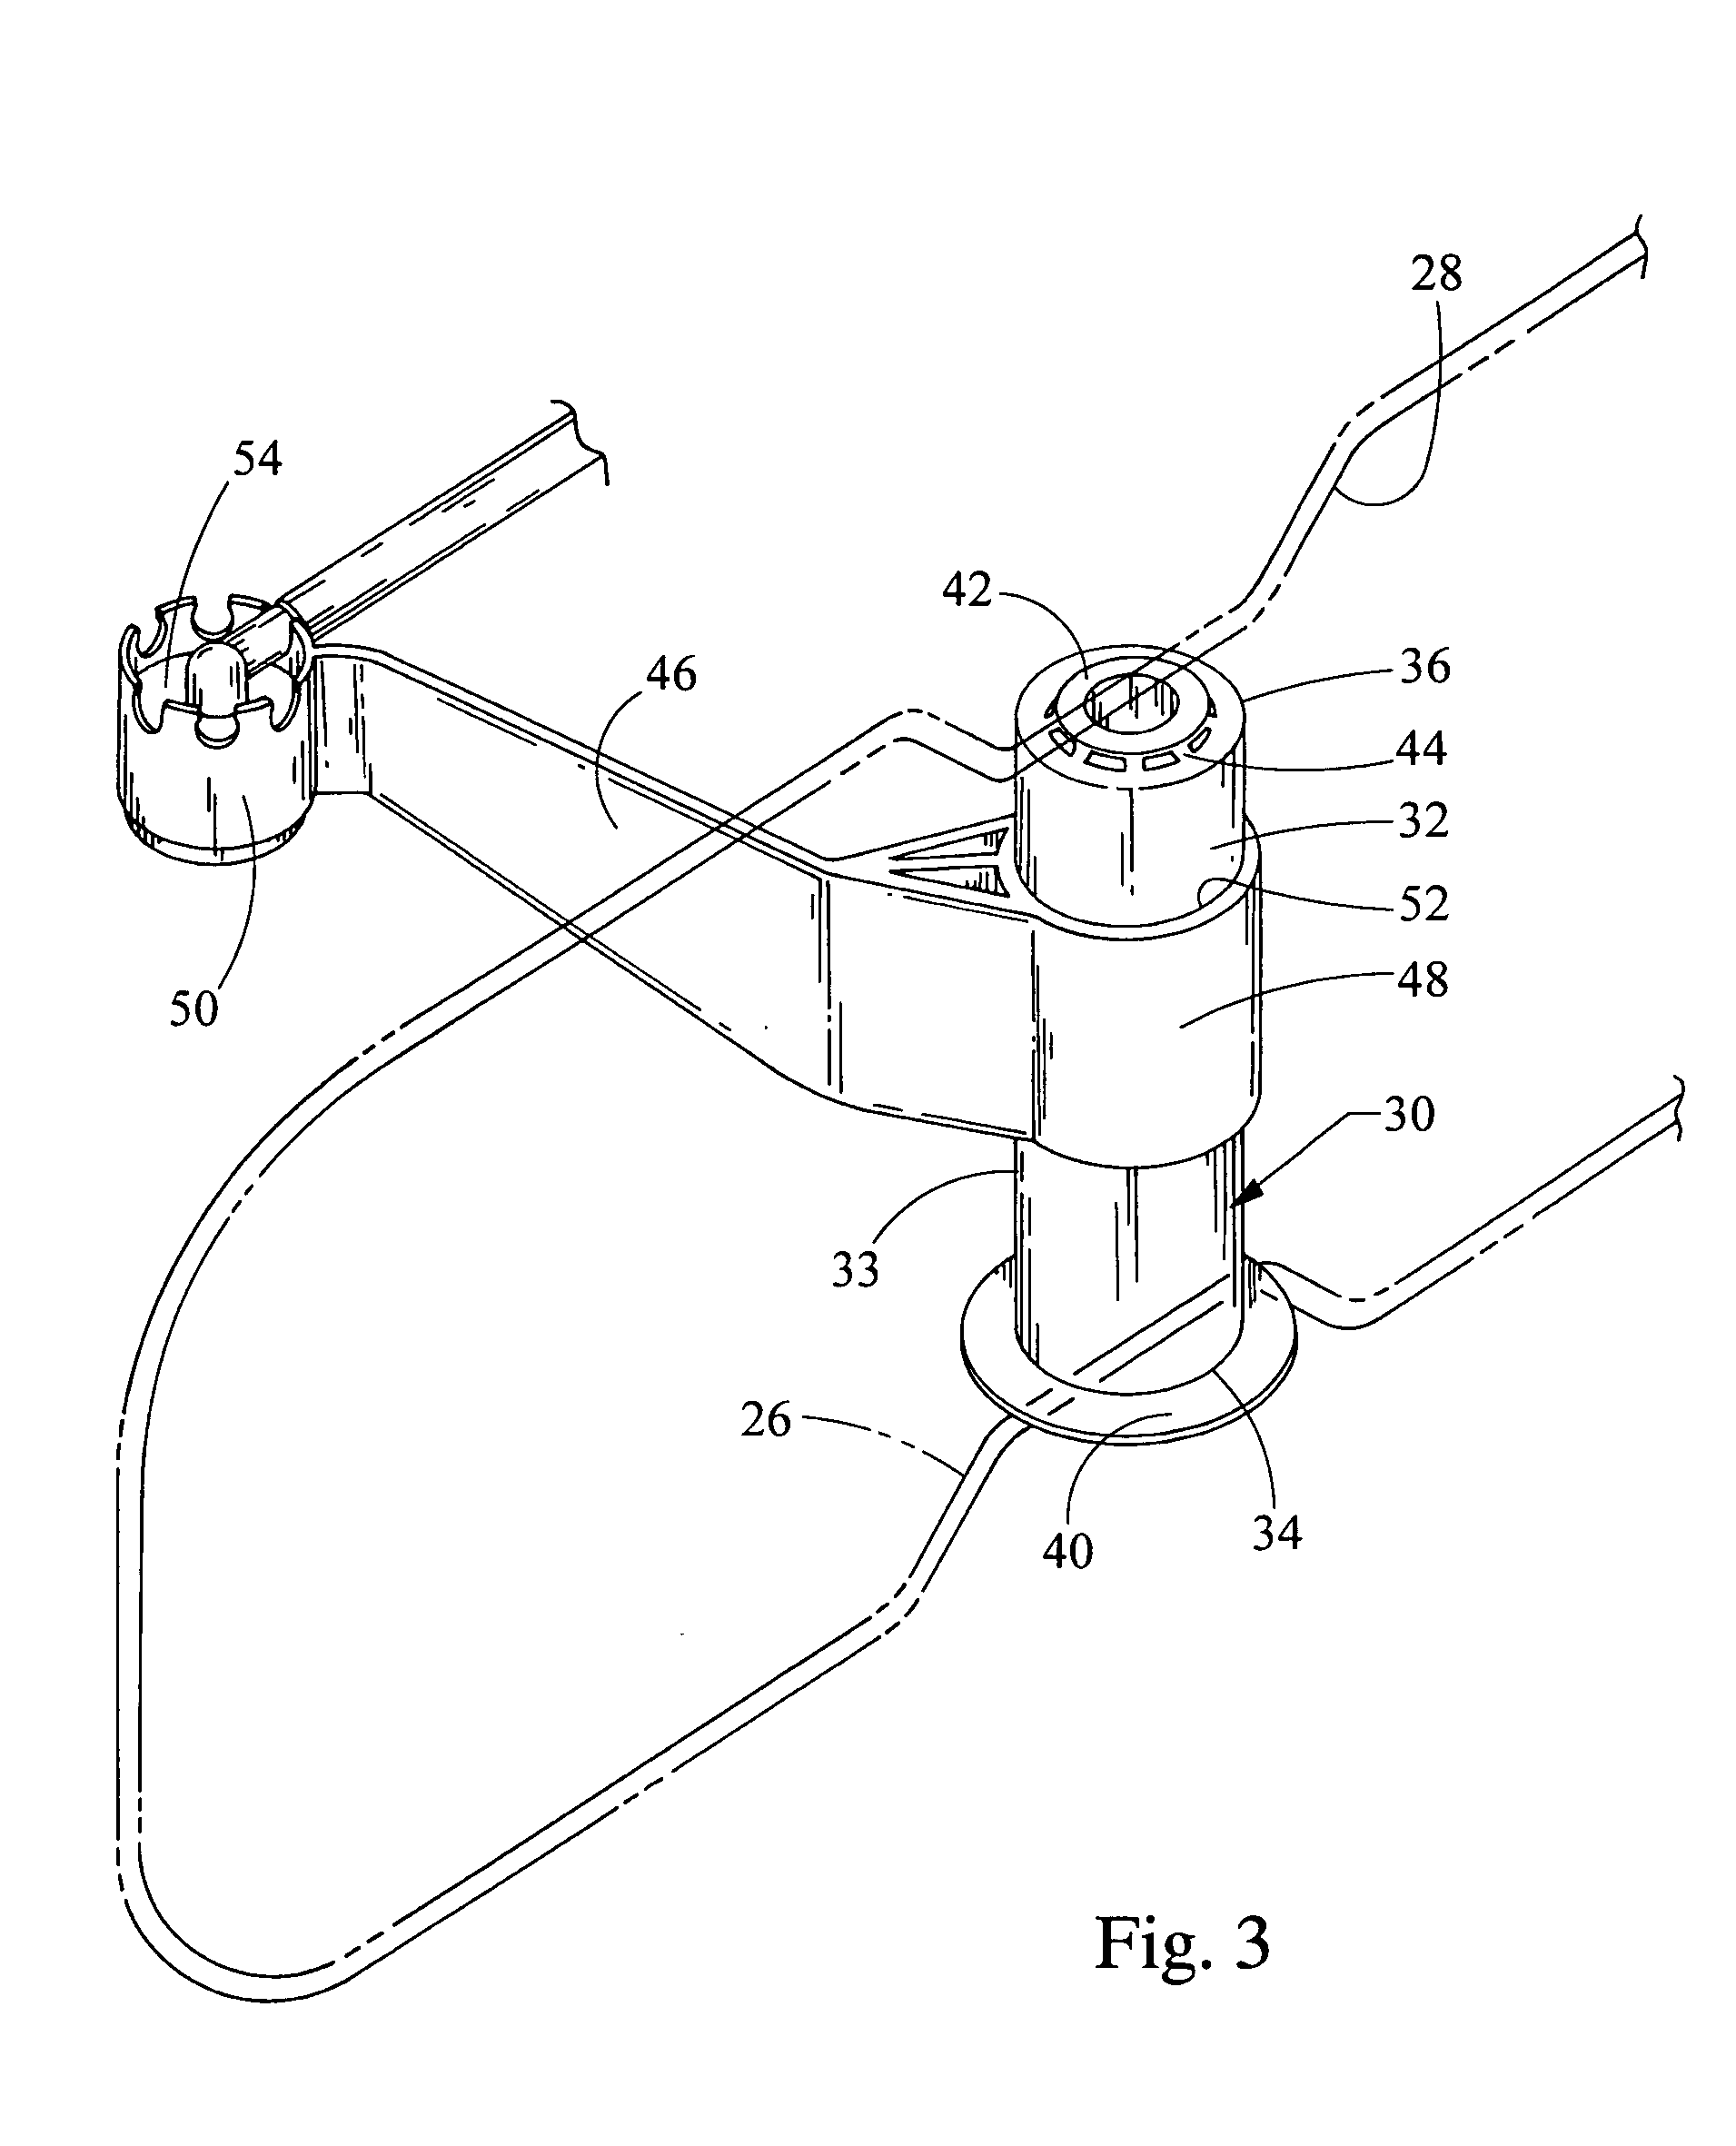 Fuel tank system having enhanced durability and reduced permeation